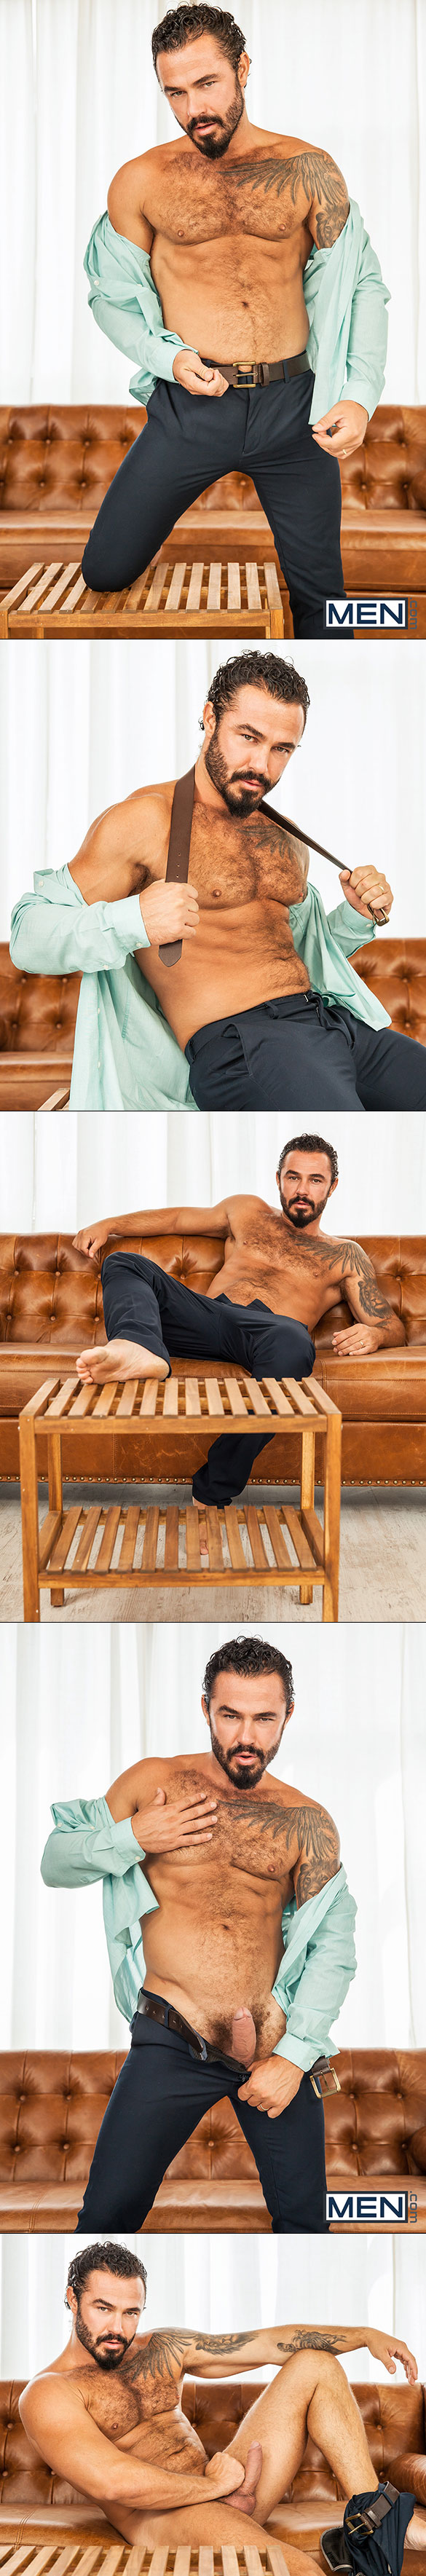 Men.com: Jessy Ares pounds Gabriel Cross in “Room in Madrid, Part 3”